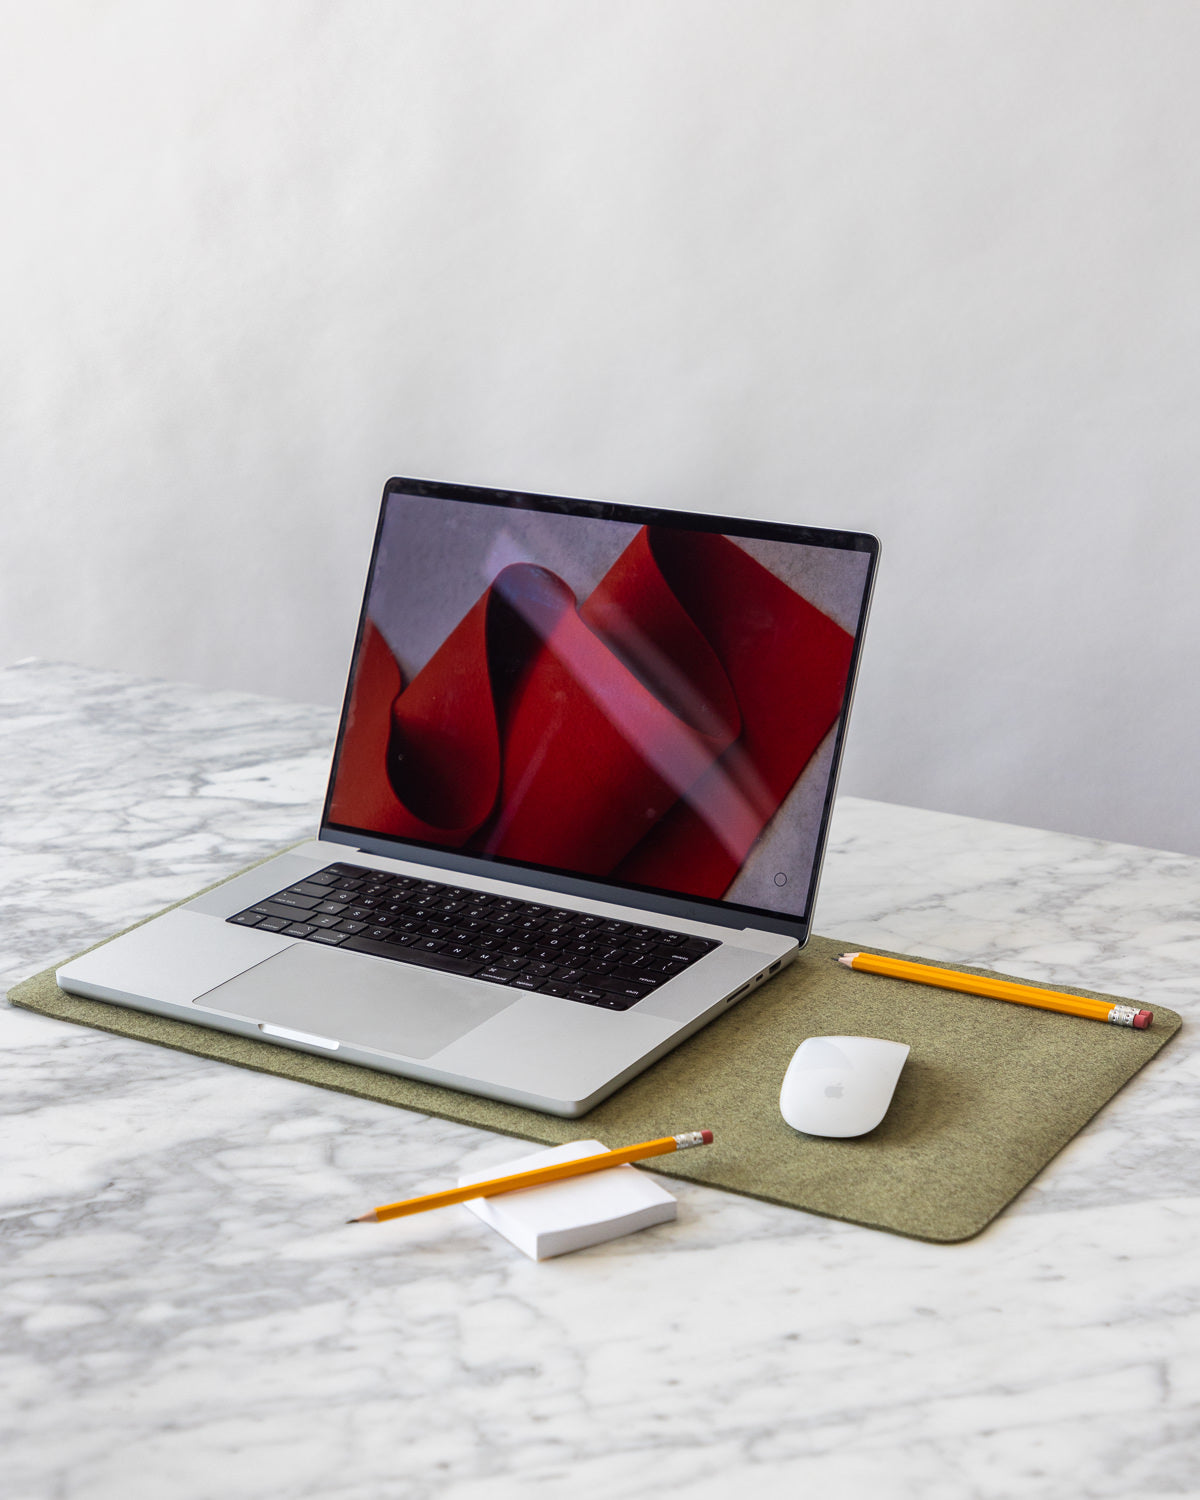 Which Desk Mat Is Right For Your Desk Setup? (Wool vs Leather vs